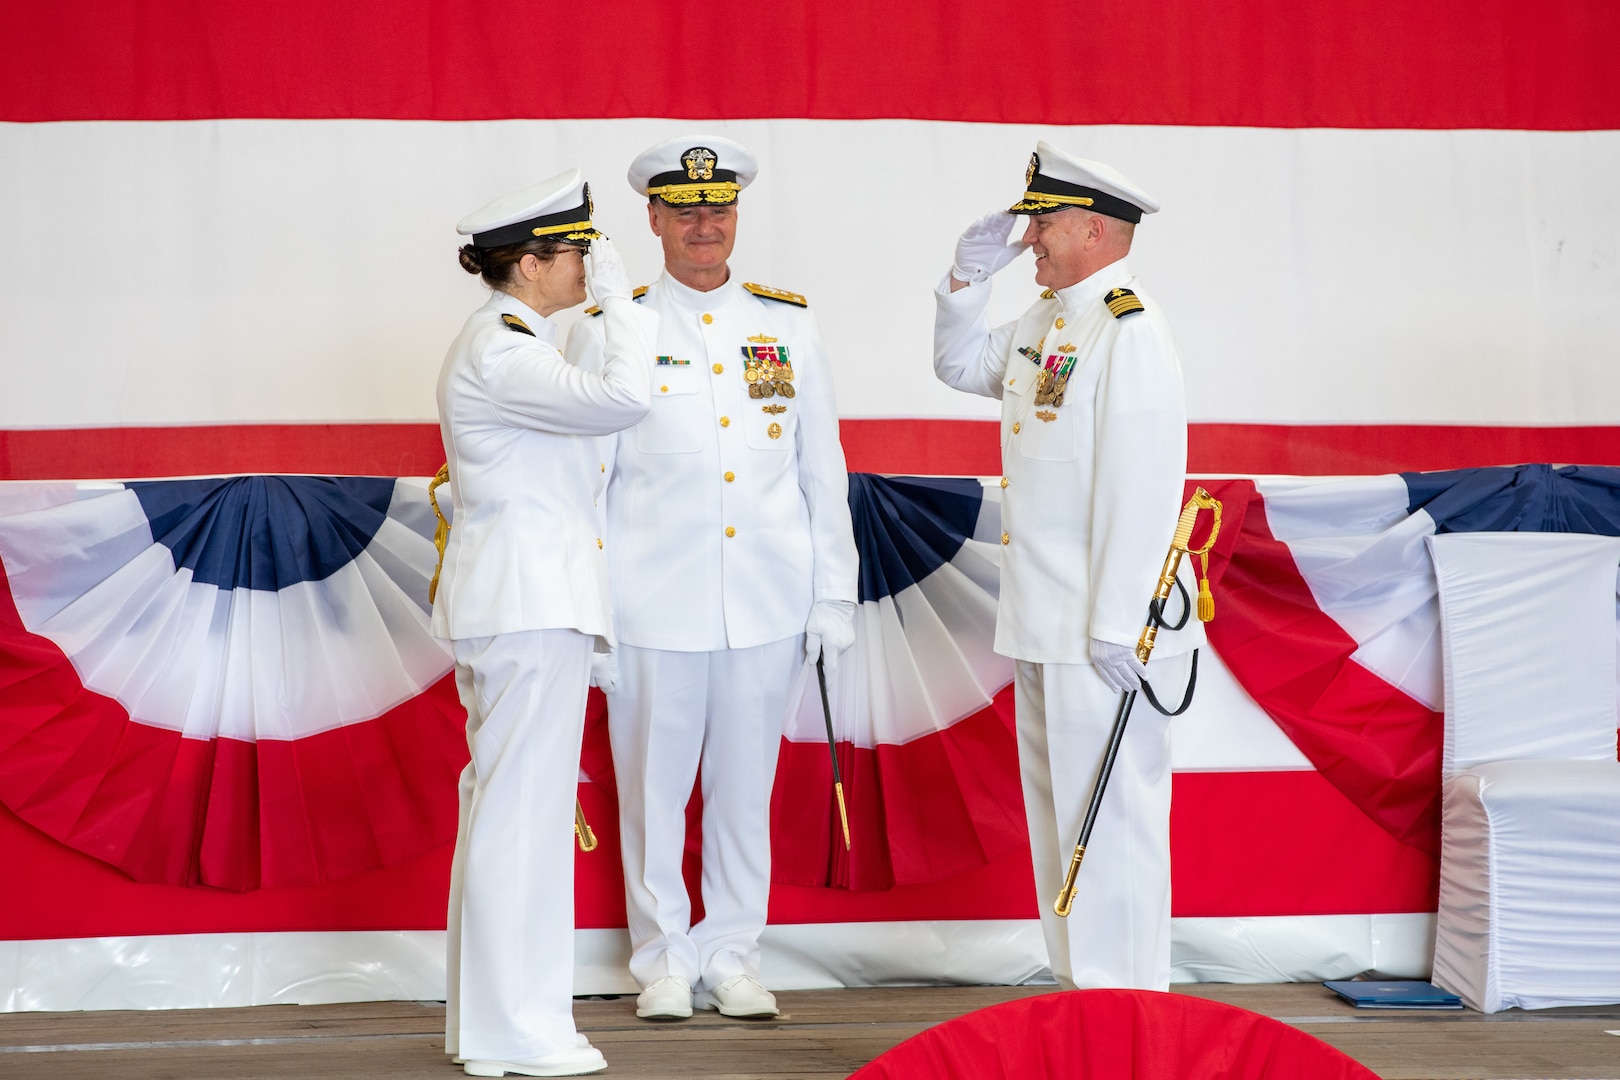 Capt. Jip Mosman assumed command of Norfolk Naval Shipyard (NNSY) as its 111th Shipyard Commander during the Change of Command Ceremony June 29.